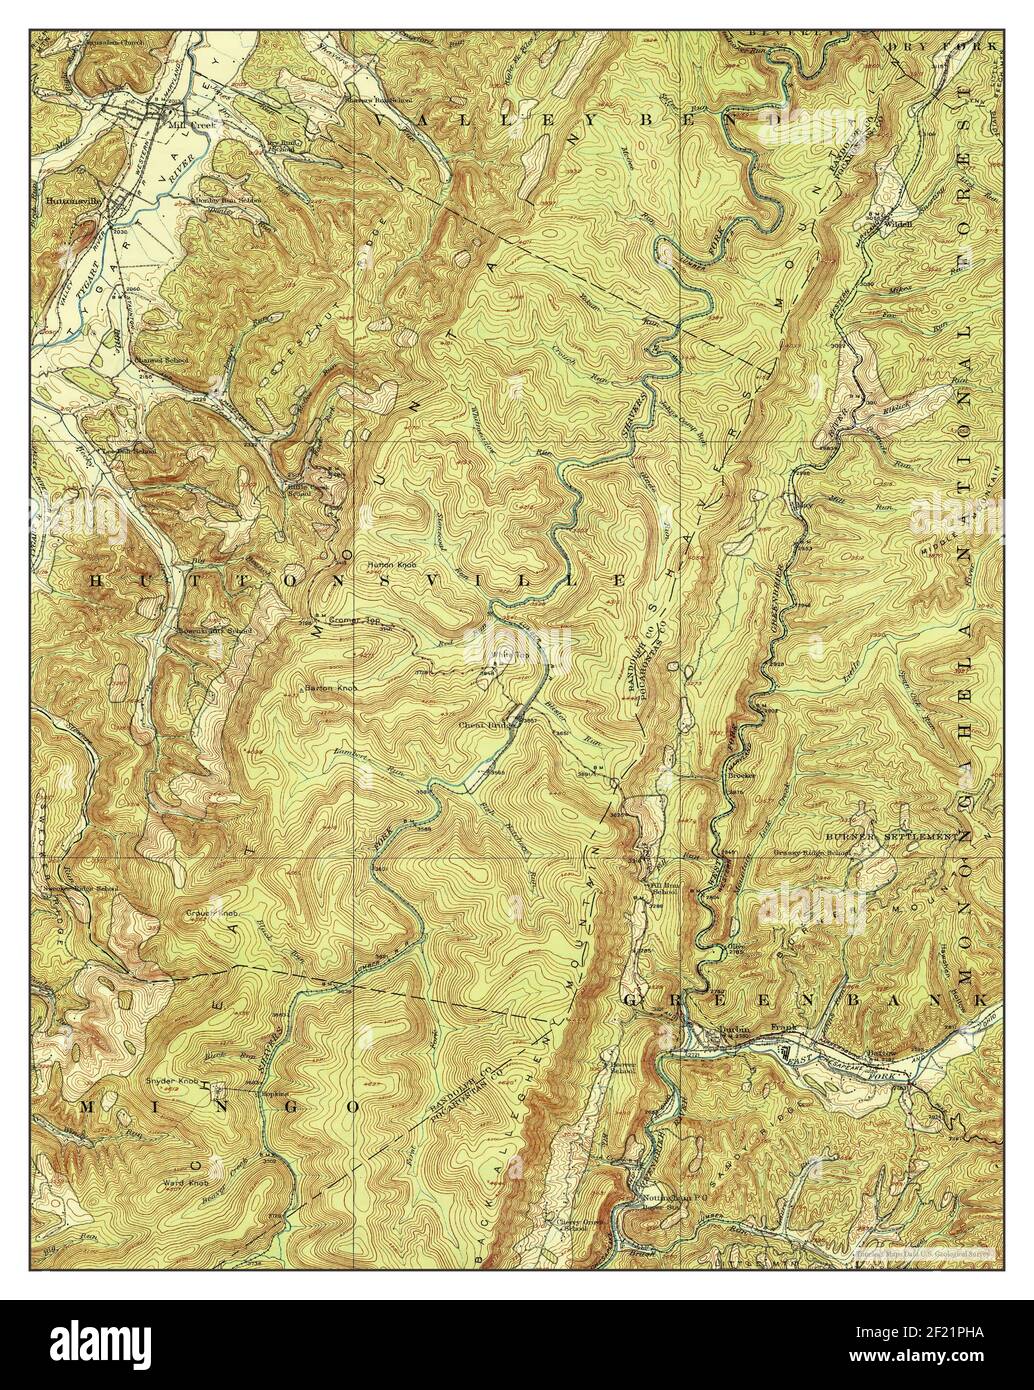 Durbin, West Virginia, map 1924, 1:62500, United States of America by Timeless Maps, data U.S. Geological Survey Stock Photo